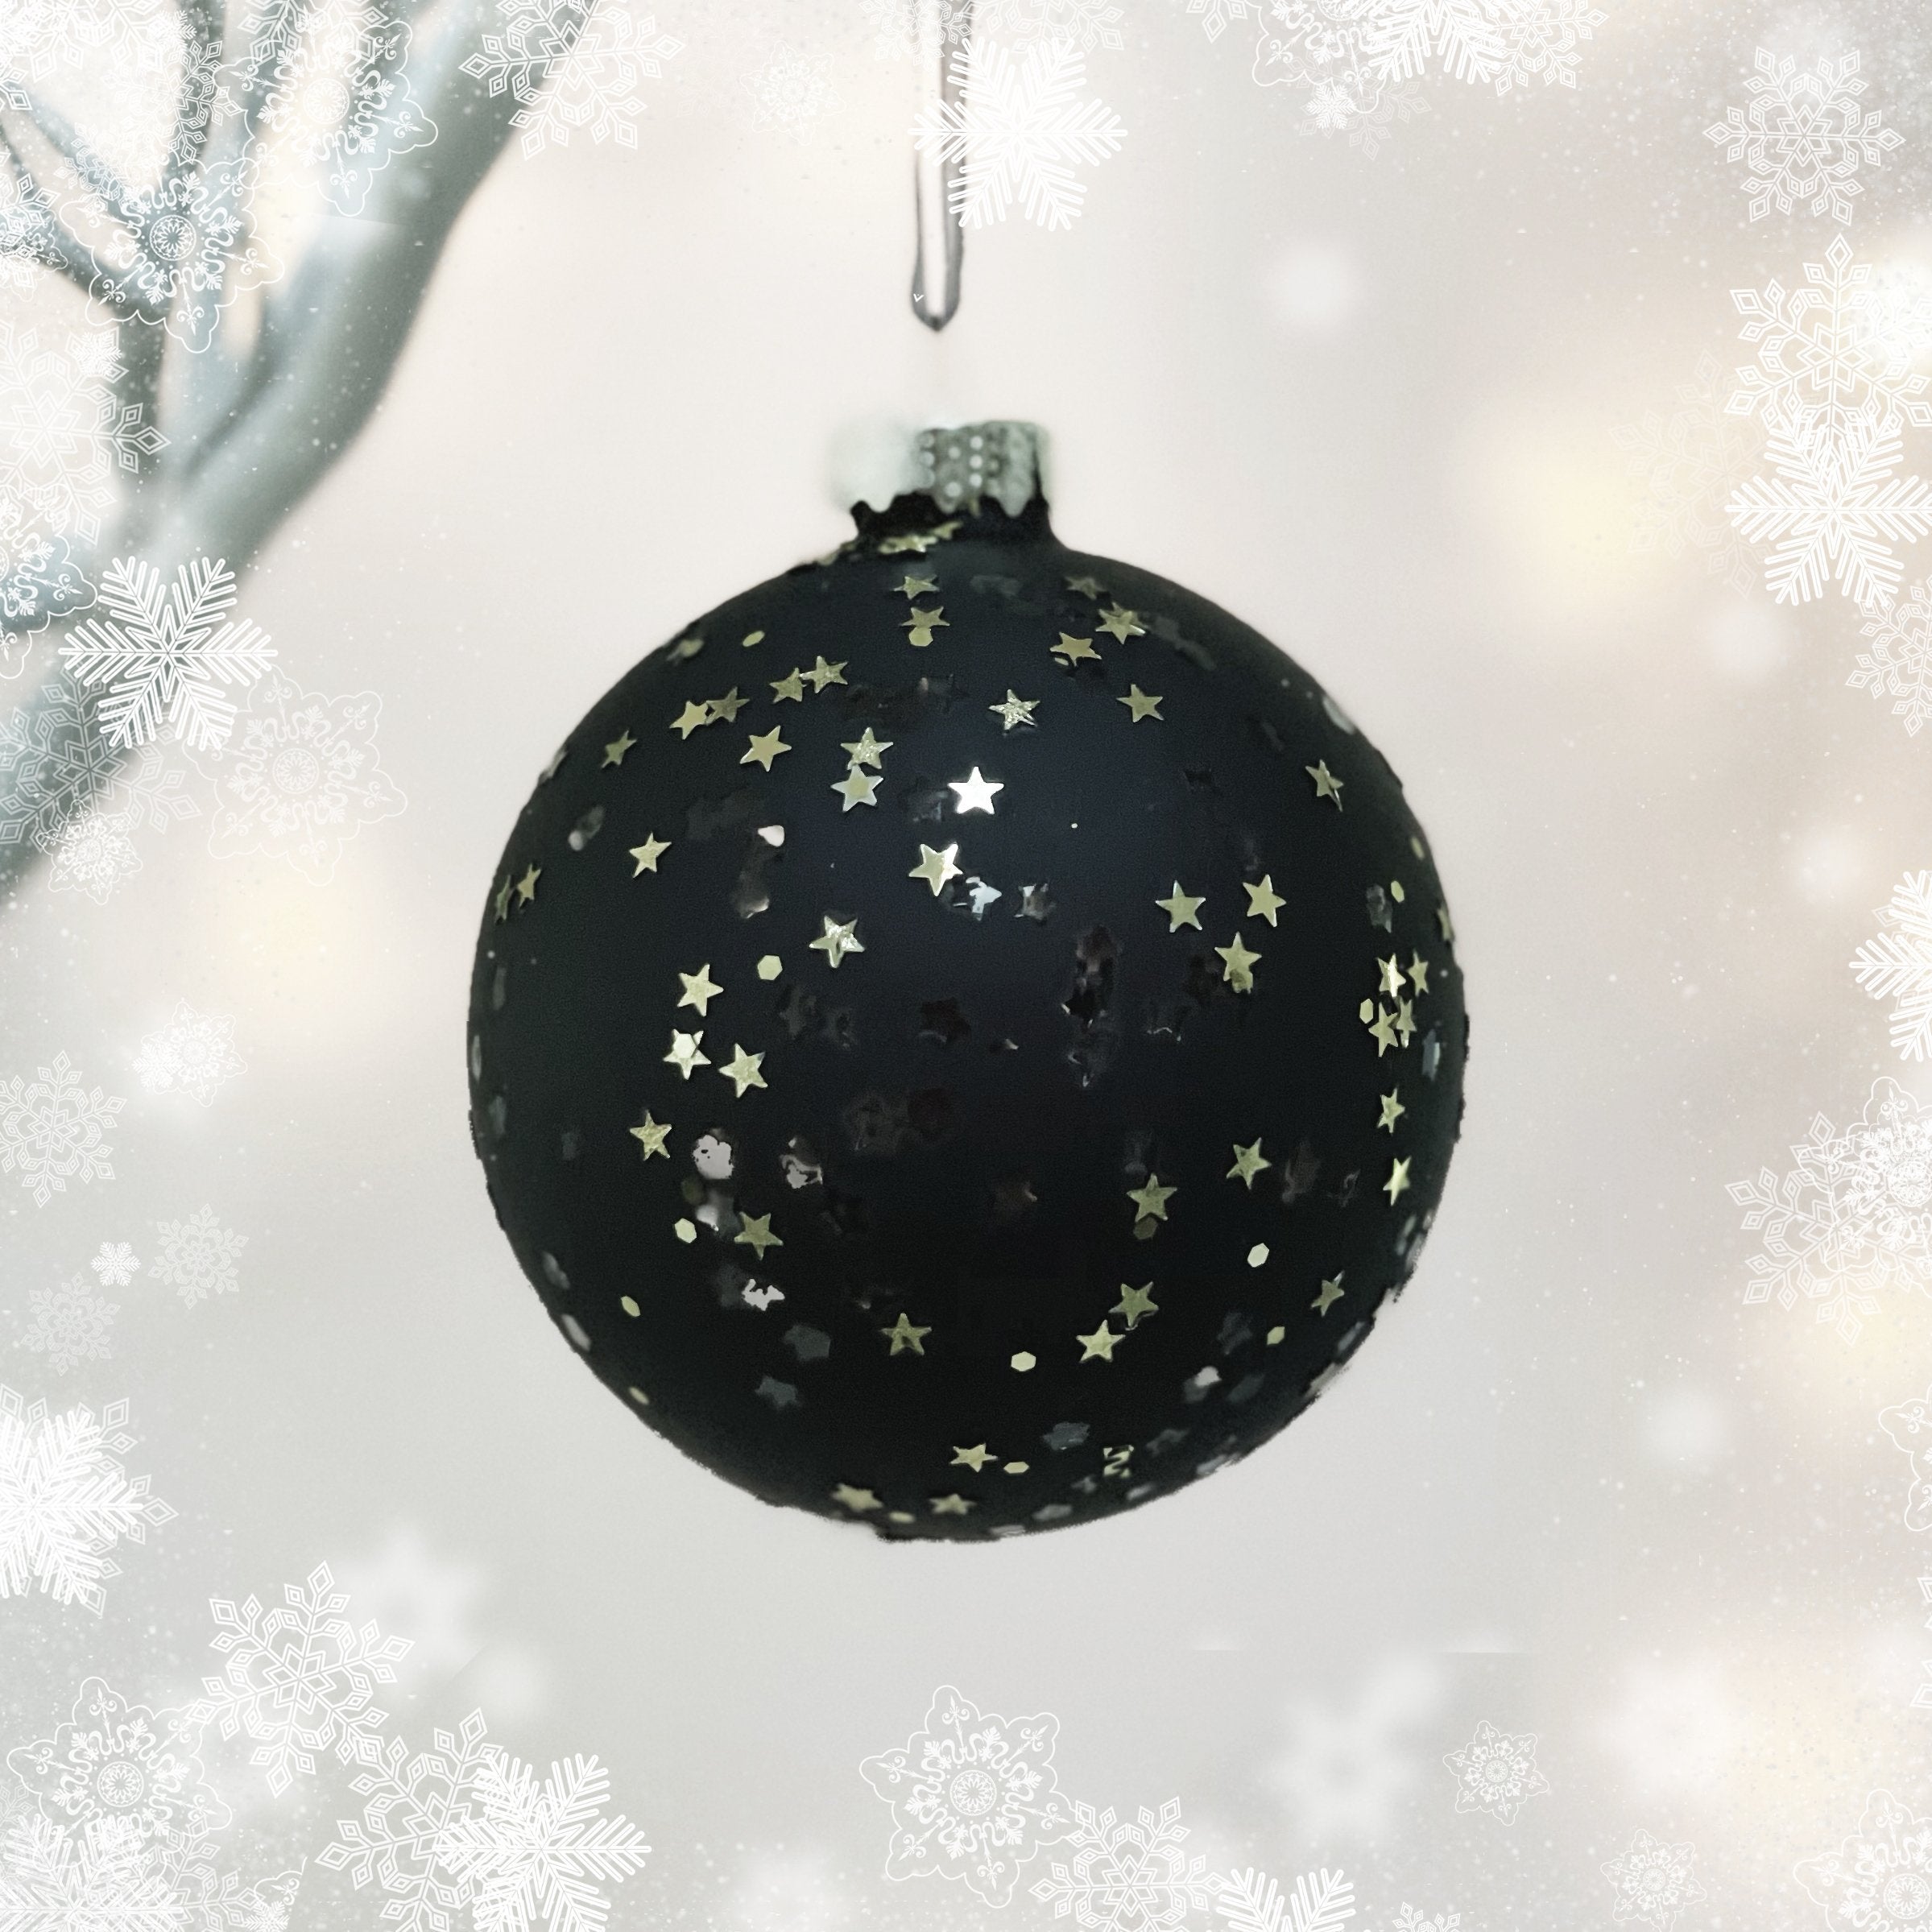 Copy of Christmas Bauble with angel wing | Natalie Ryan Design